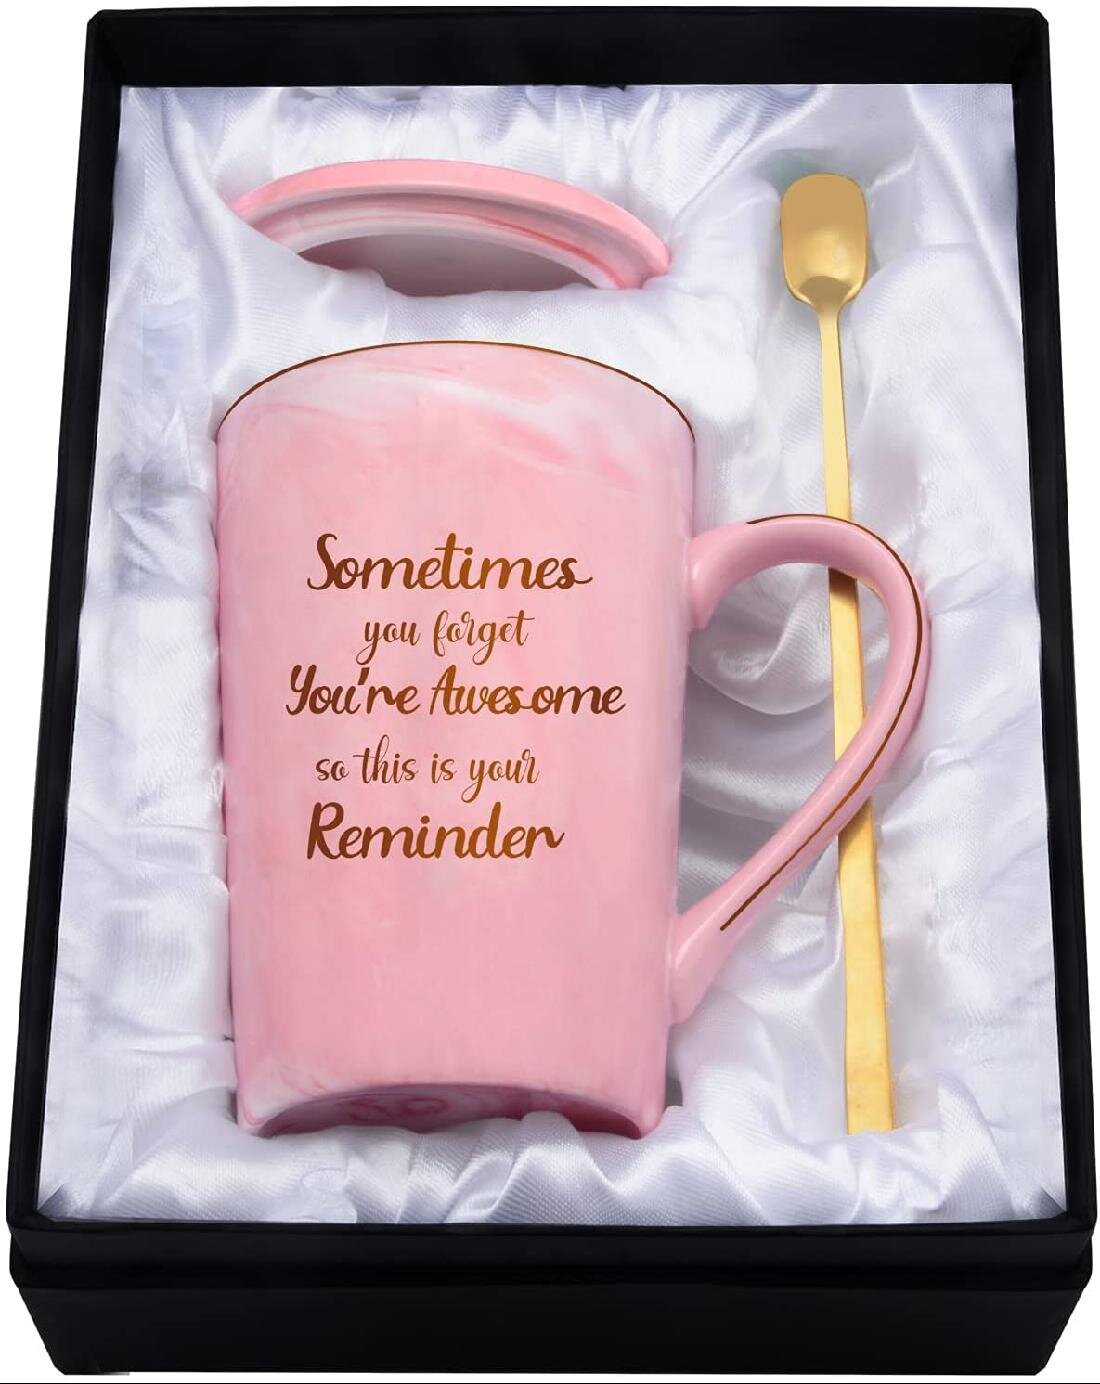 Xinchapter Thank You Gifts For Women Sometime You Forget You Re Awesome So This Is Your Reminder Mug Birthday Graduation Inspirational Retirement Gifts For Women Her Friends Sister Ceramic Marble Mug 14oz Pink